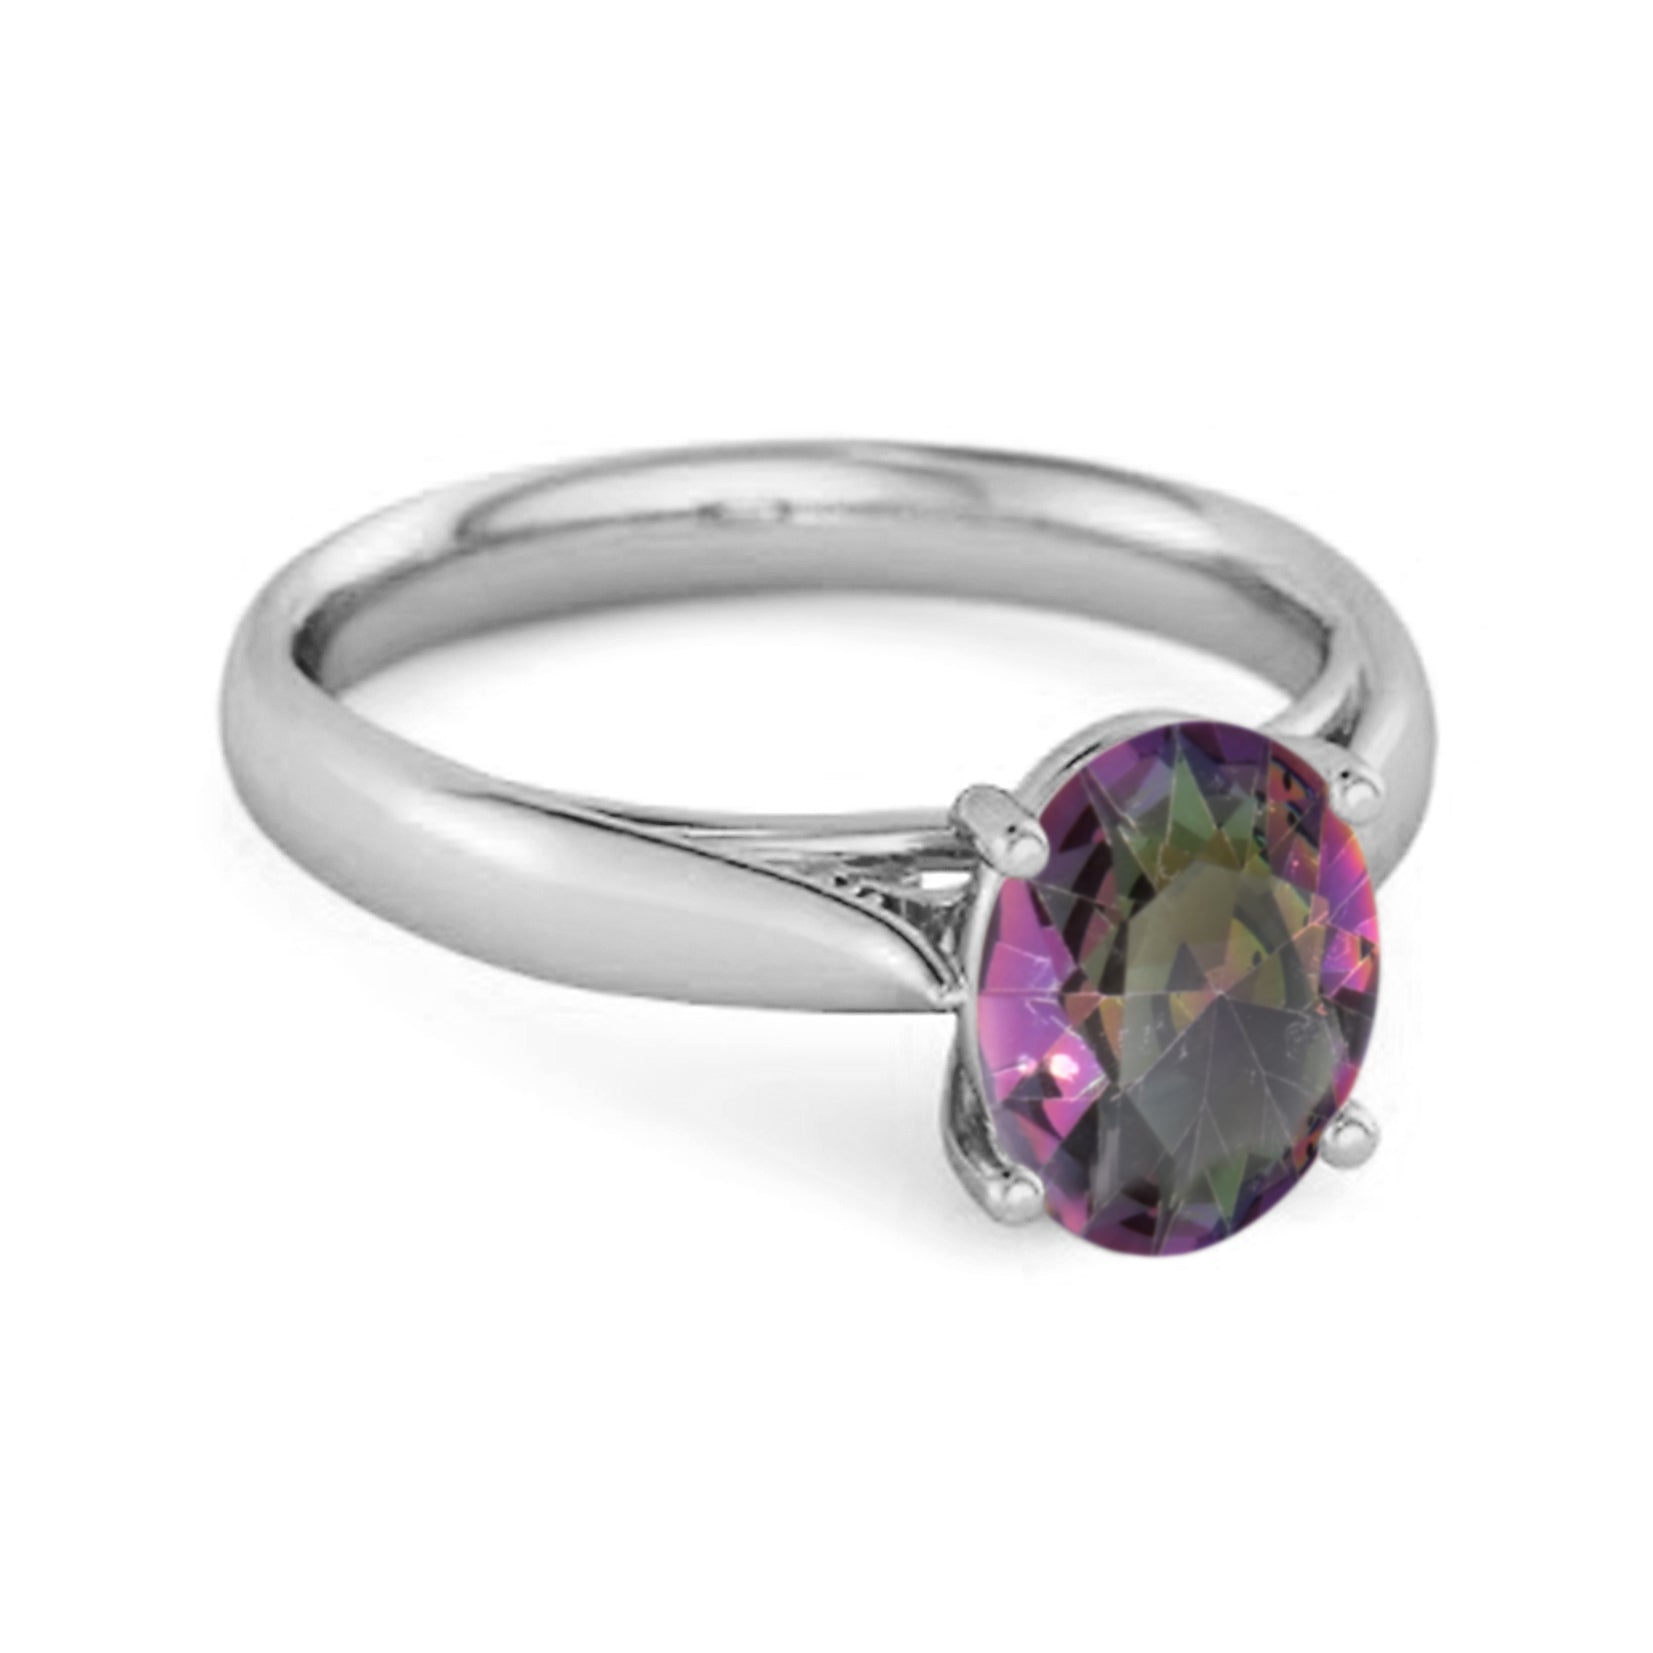 Buy Ornate Jewels Adjustable Solitaire Single Stone Ring for Women Online  At Best Price @ Tata CLiQ